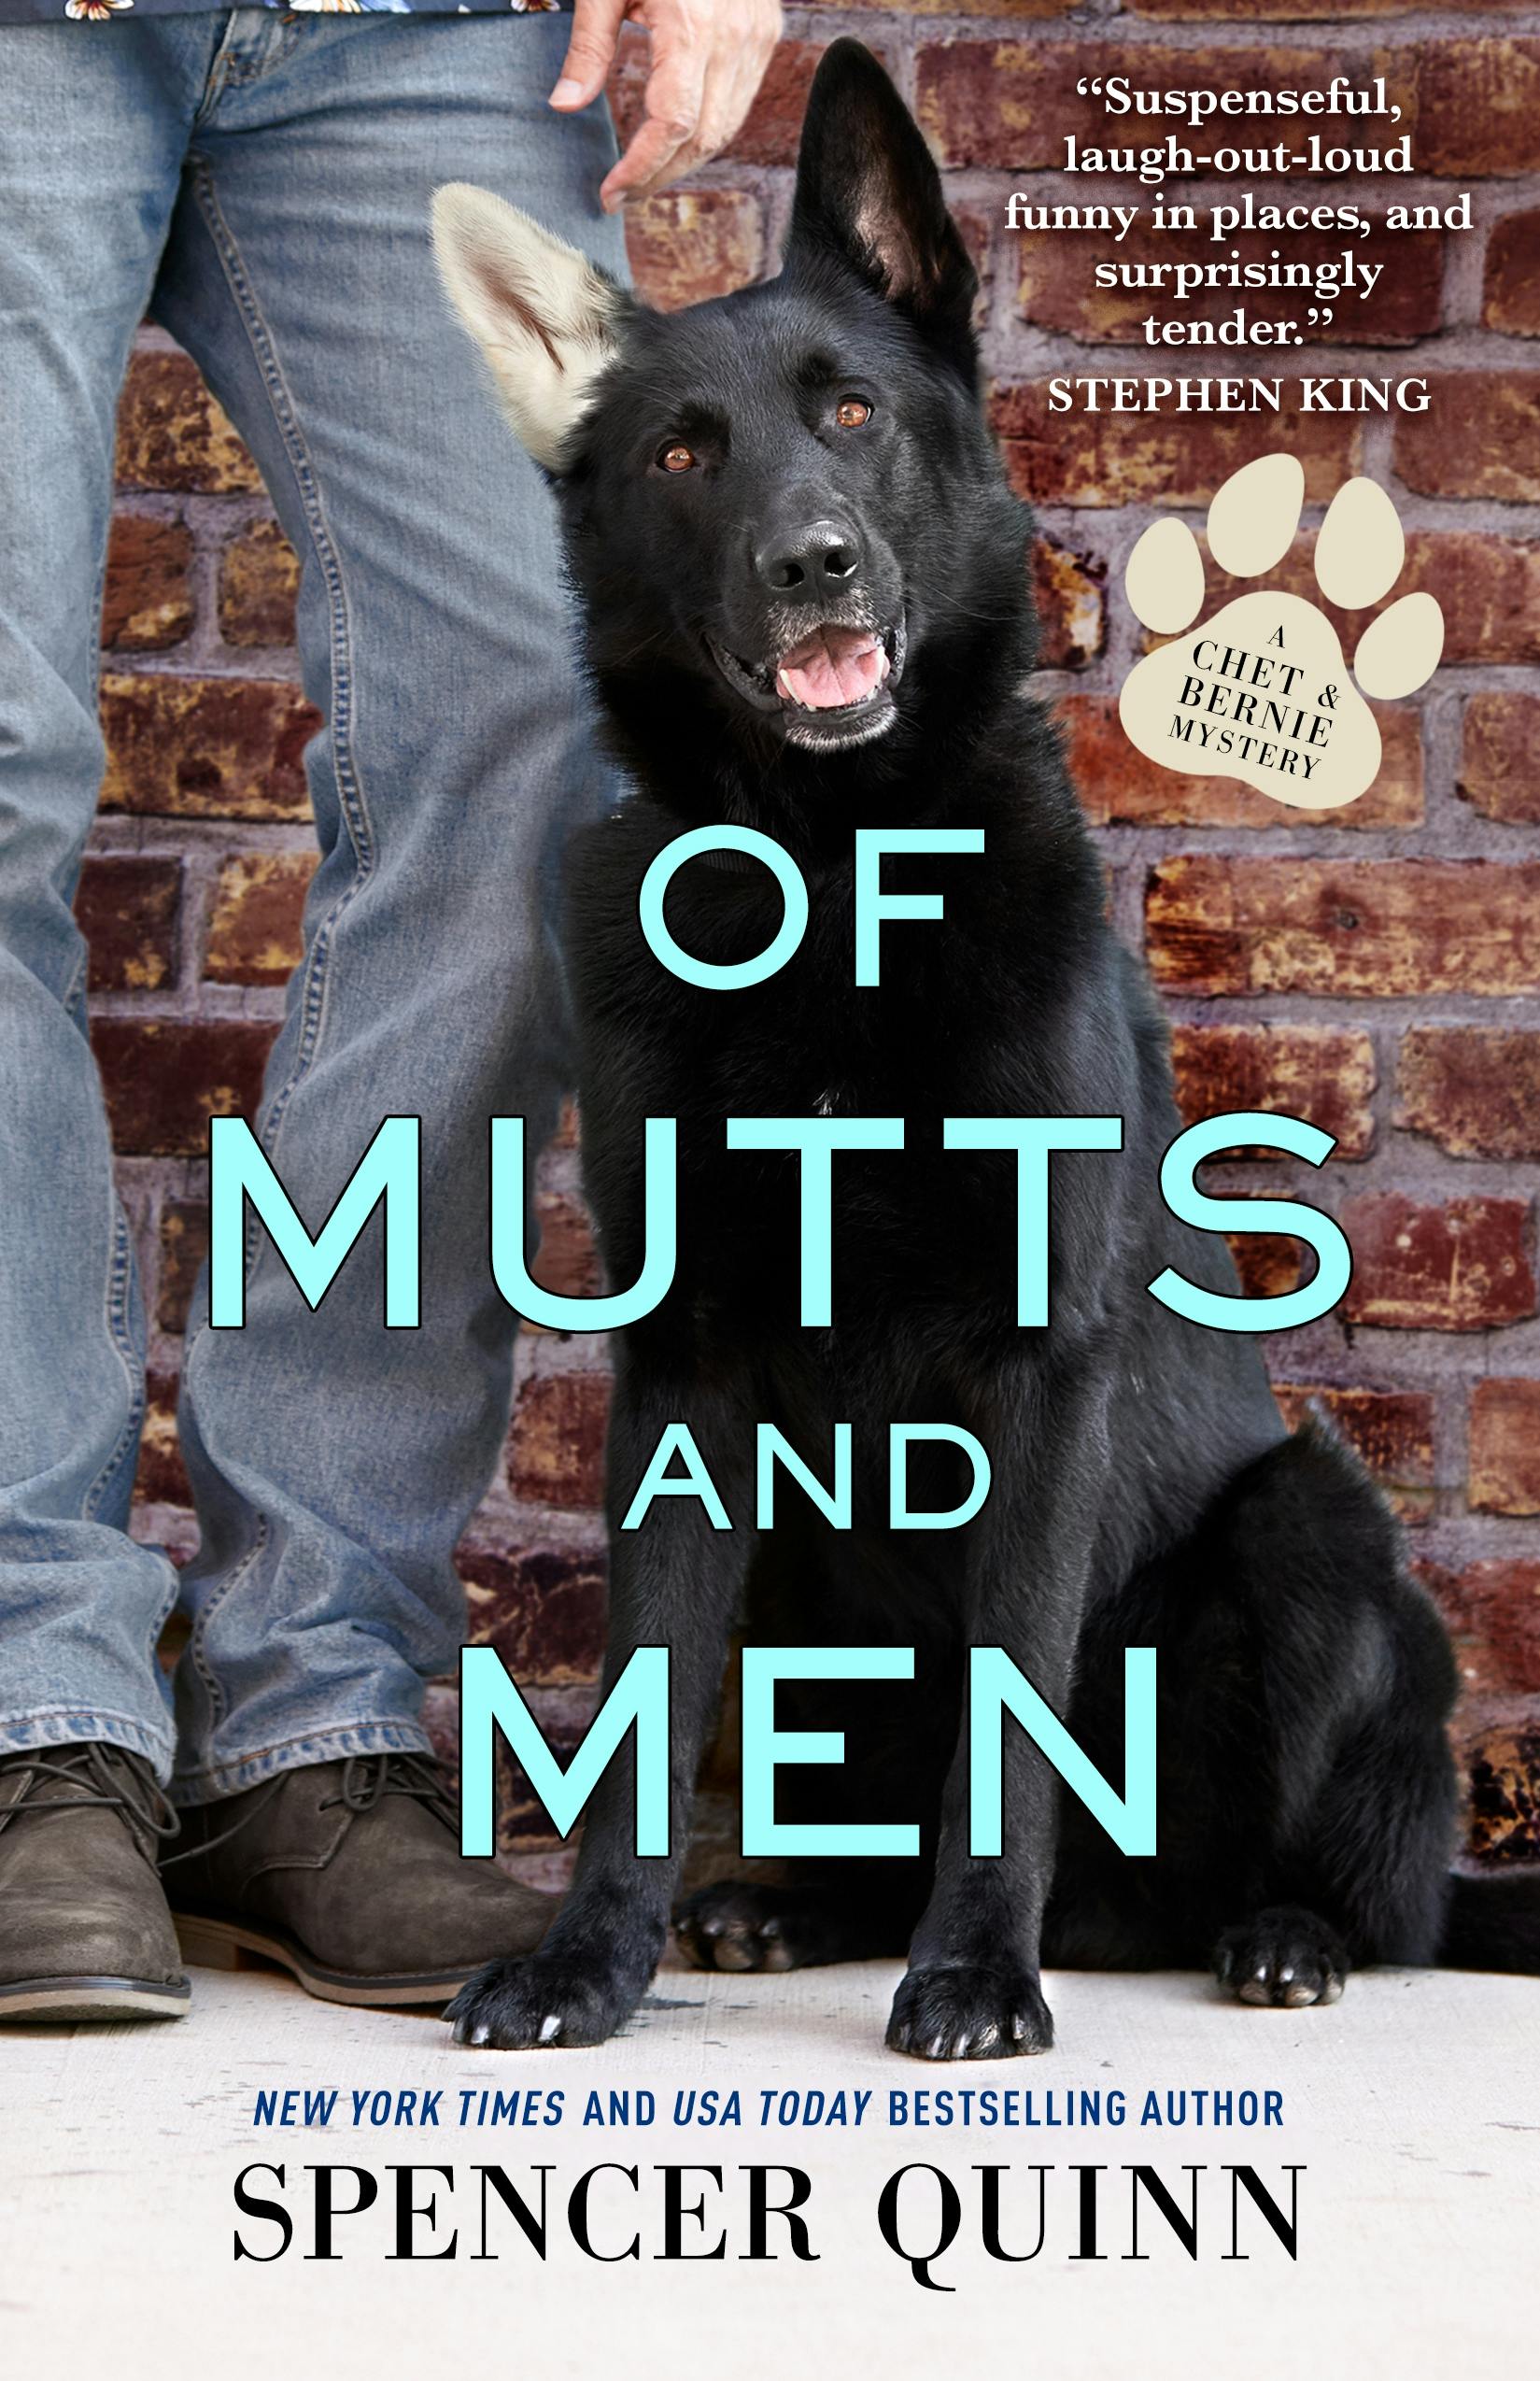 Cover for the book titled as: Of Mutts and Men